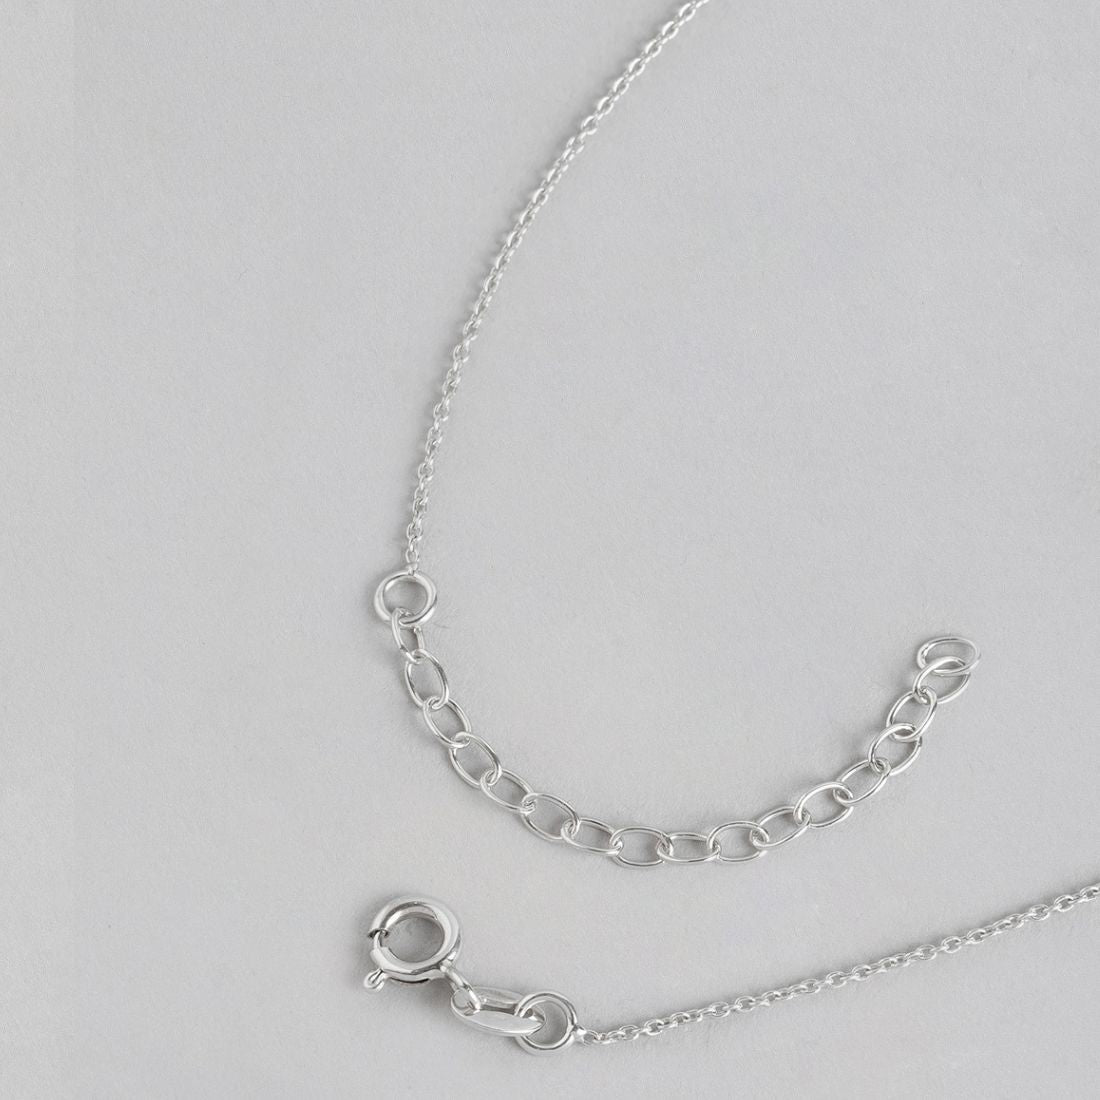 Blue Solitaire Rhodium Plated 925 Sterling Silver Link Chain Necklace